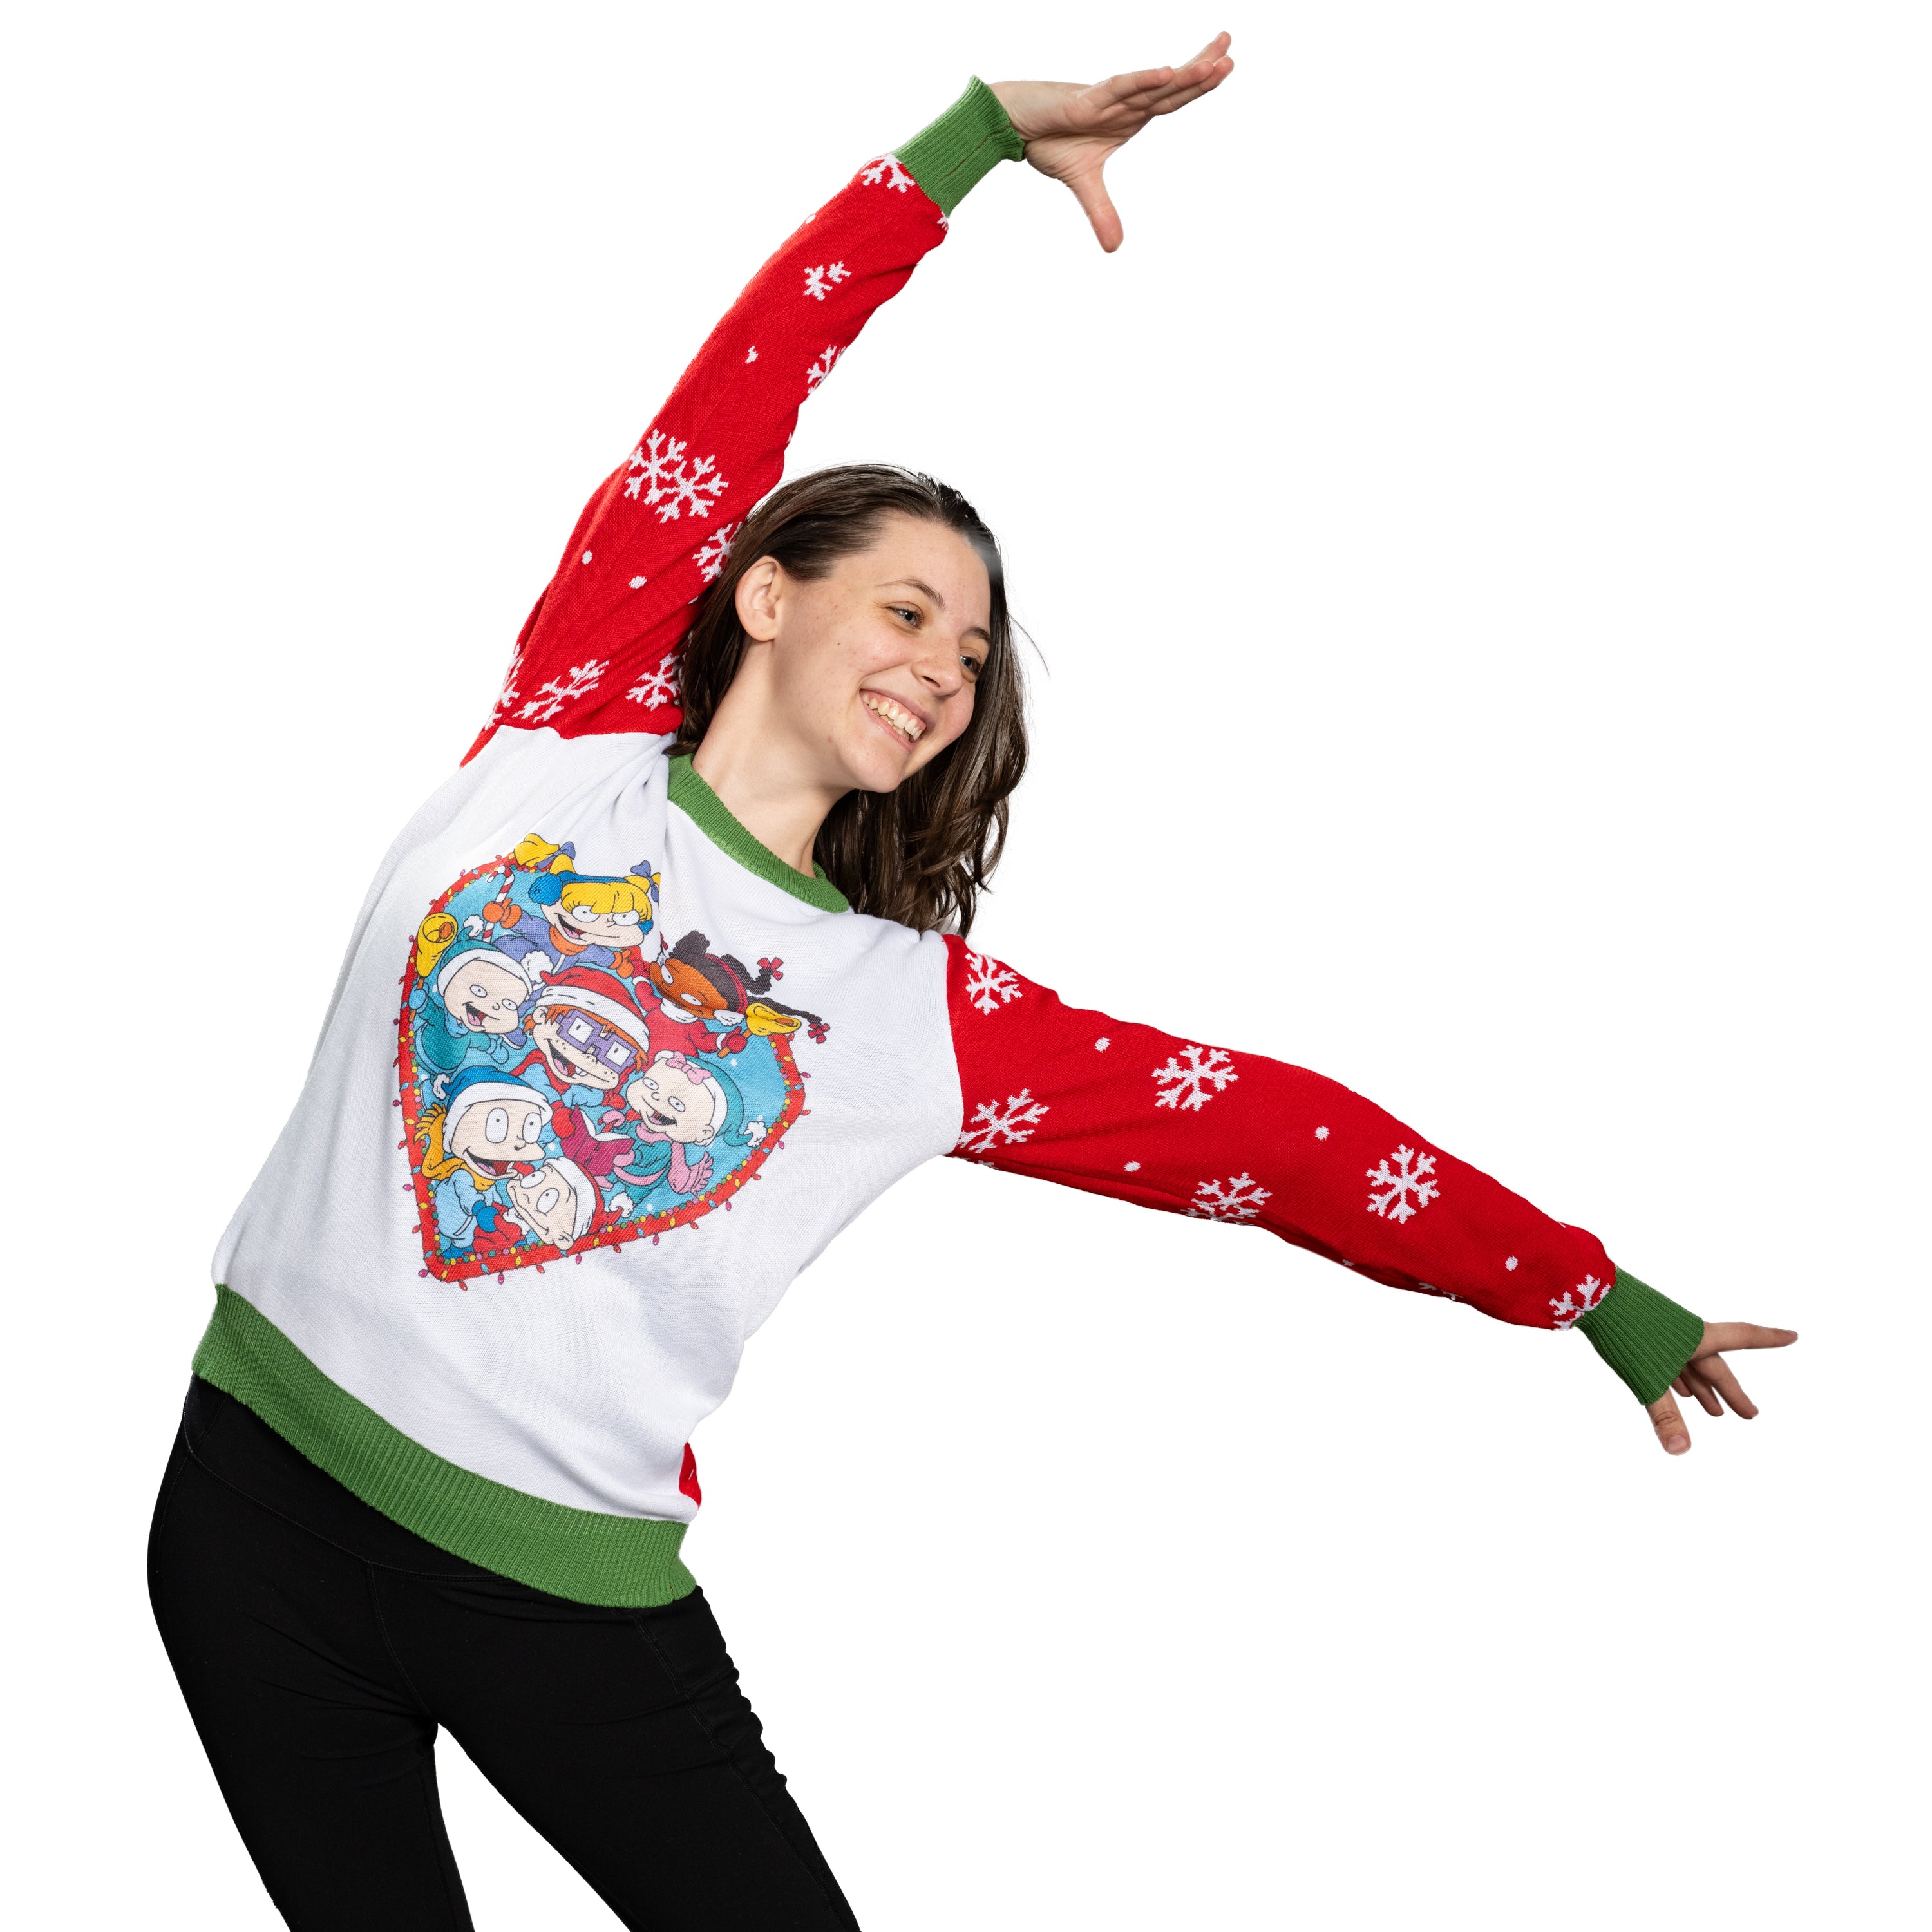 Rugrats "Winter Love" Ugly Christmas Sweater